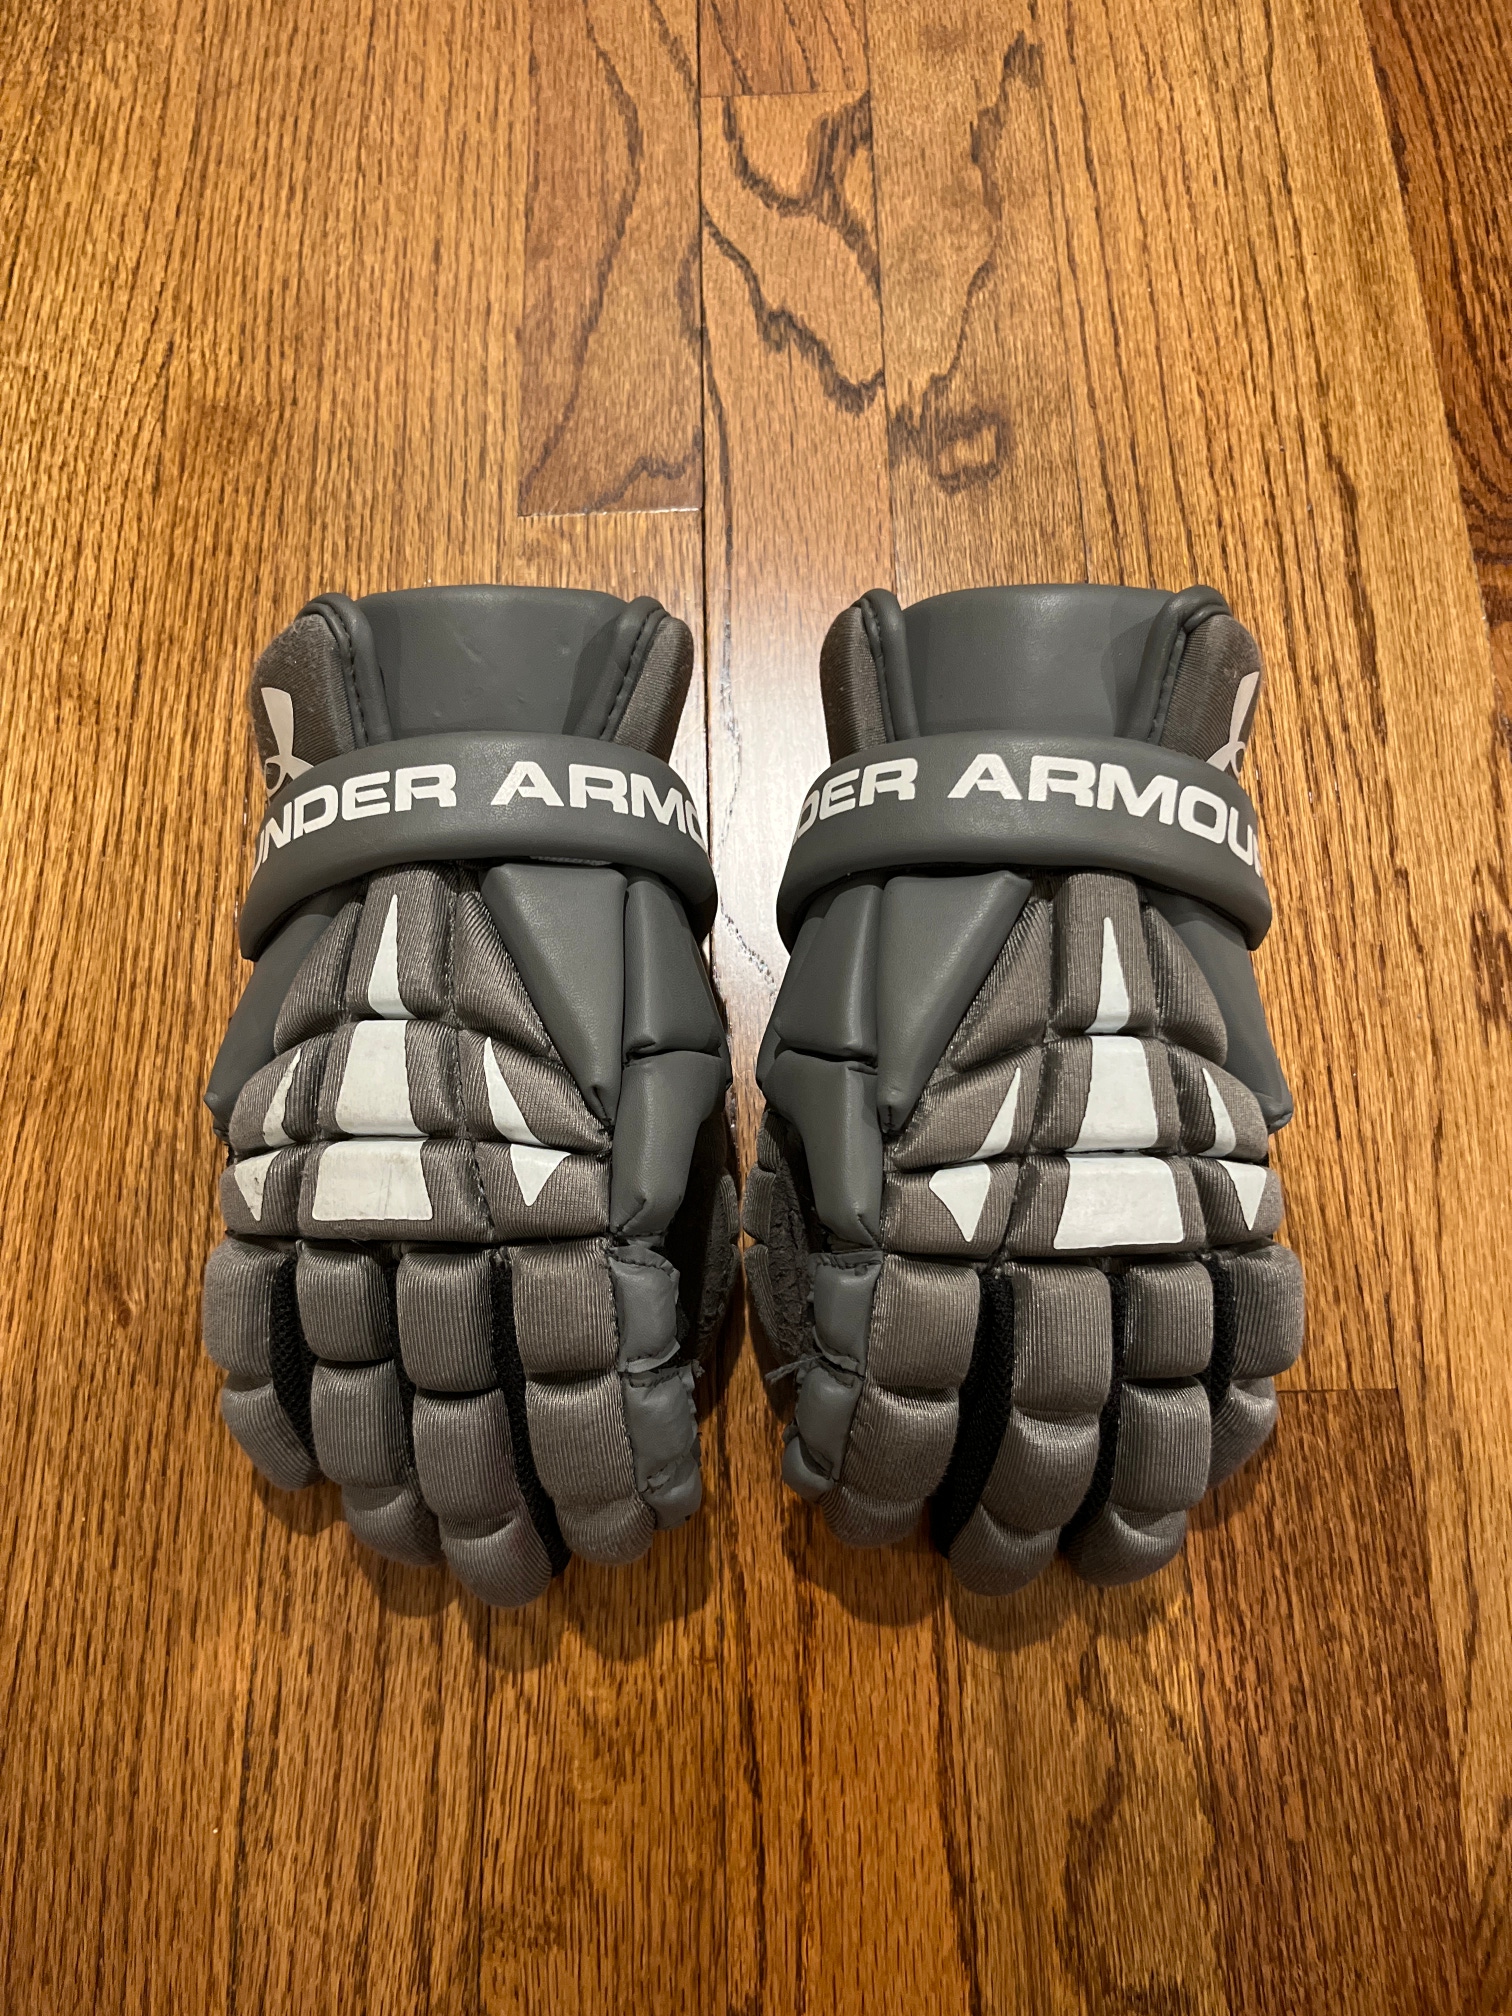 Used Under Armour Charge 2 Lacrosse Gloves 12"